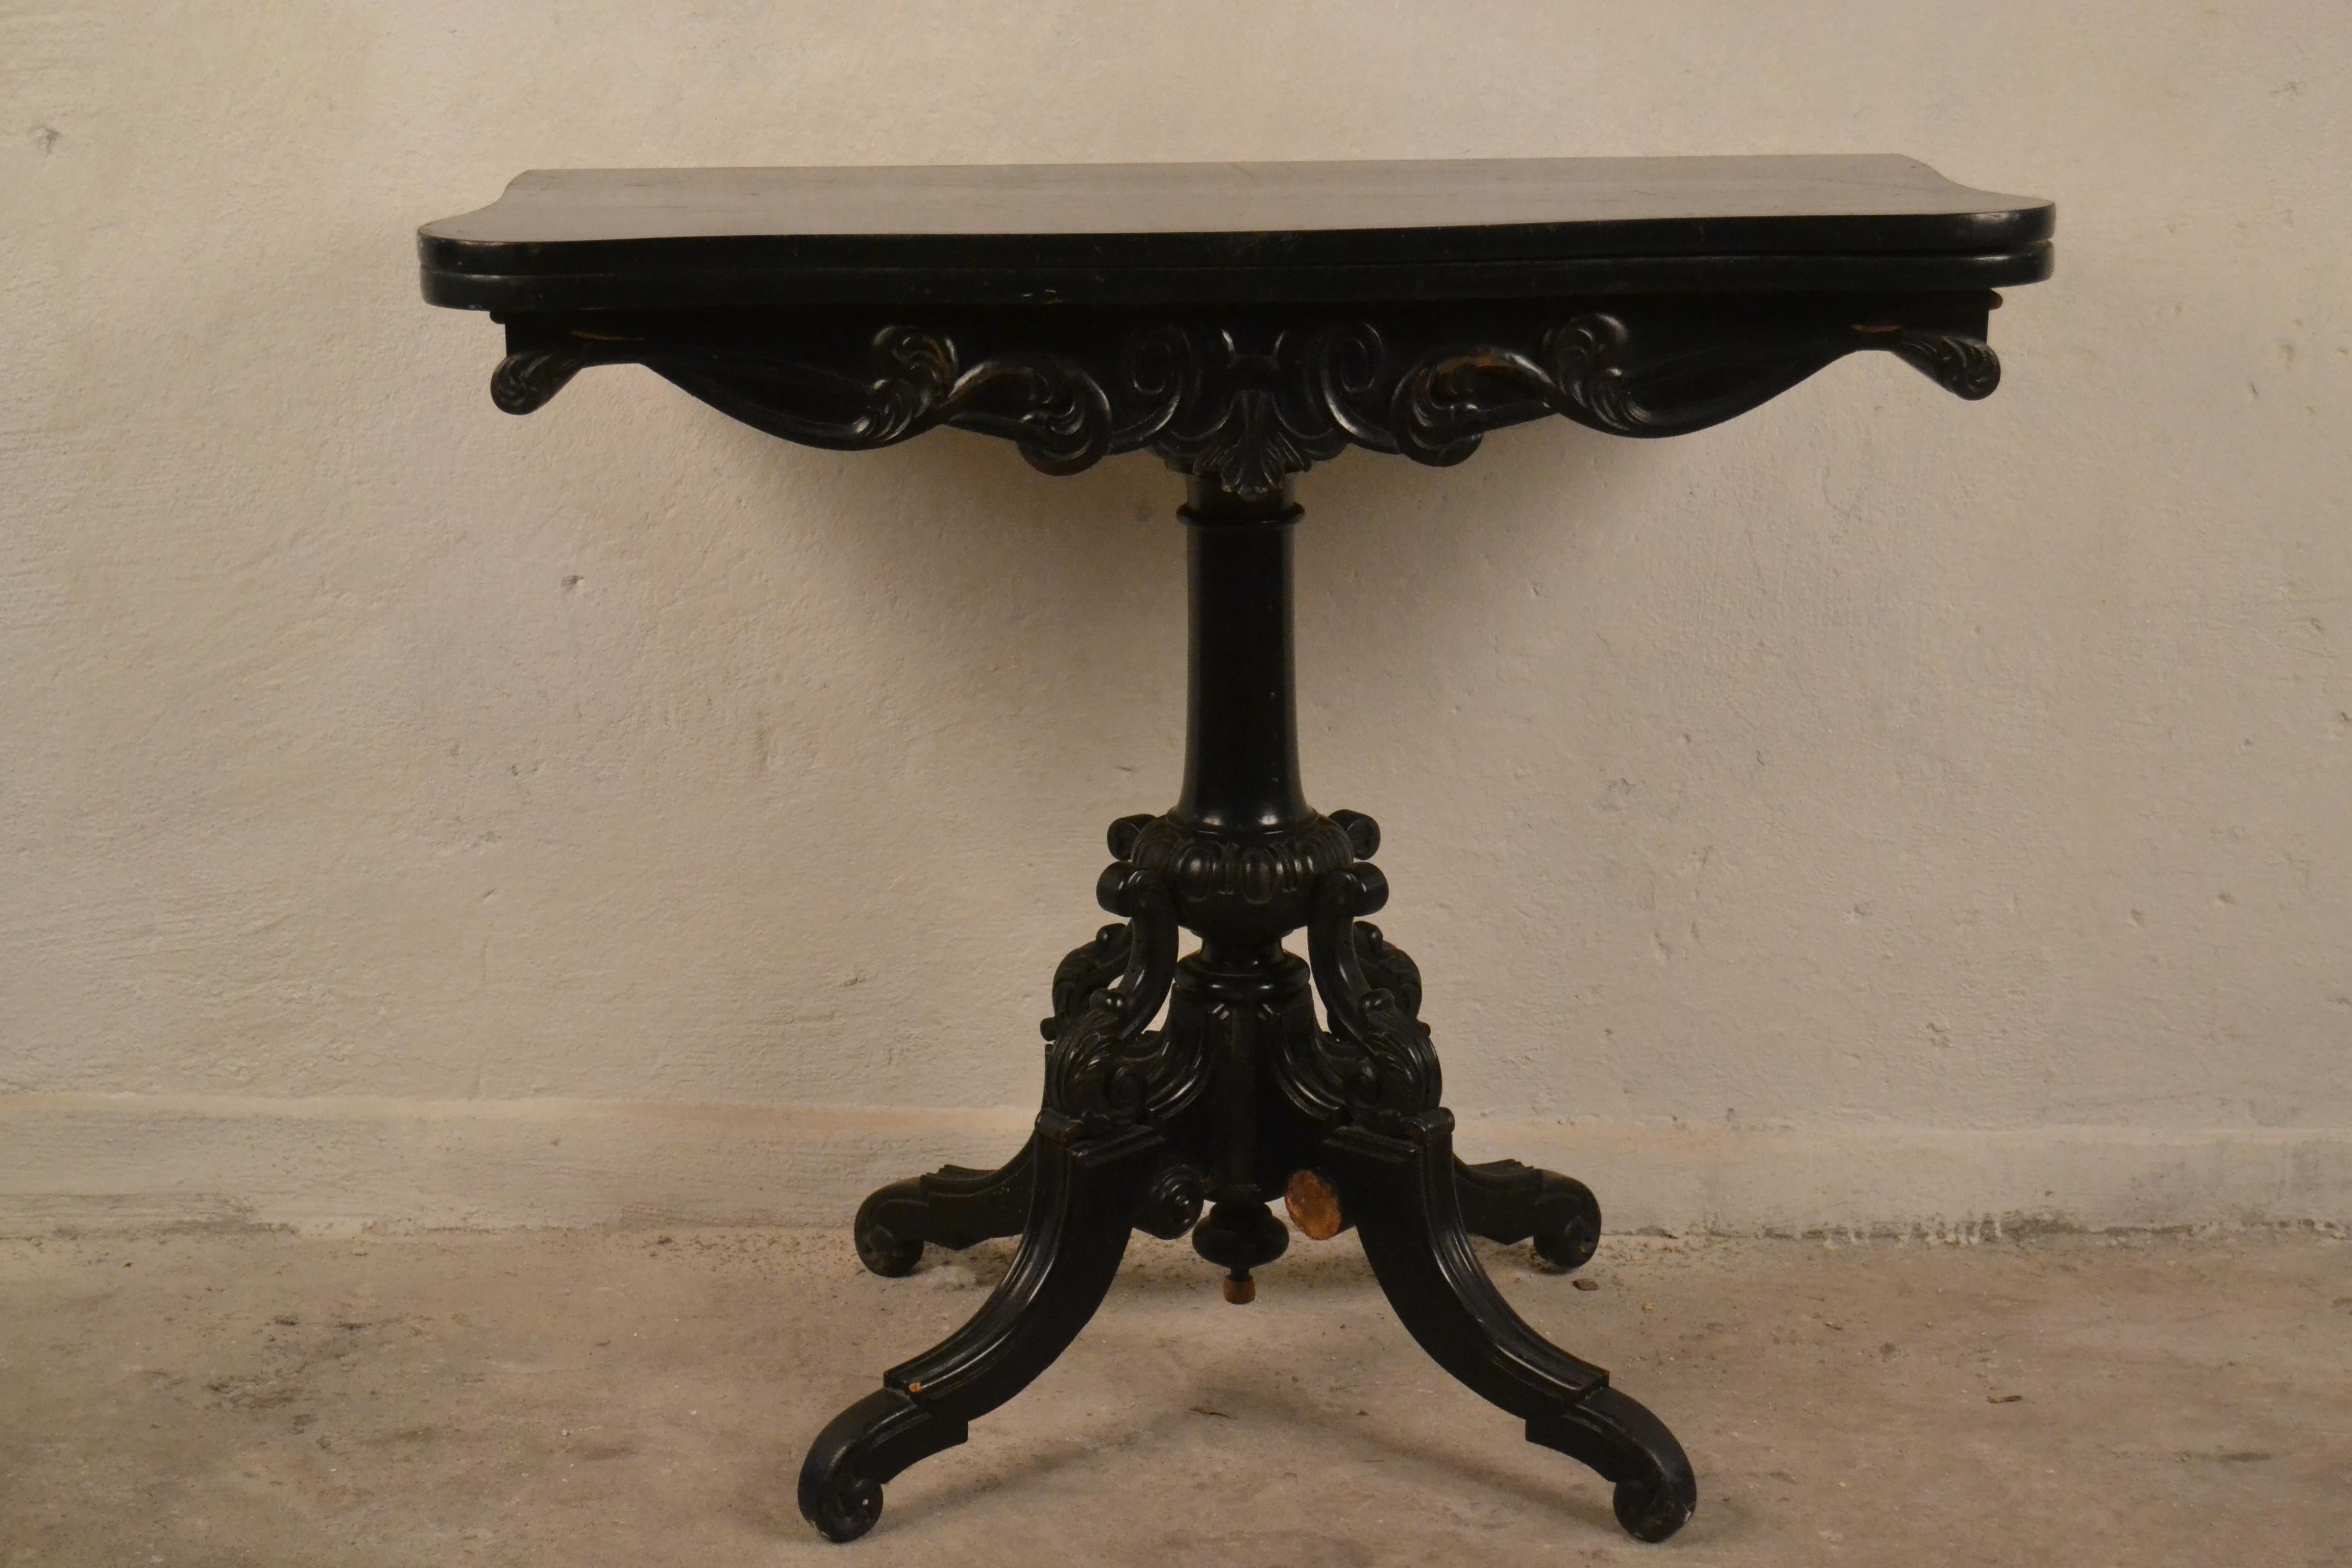 A French card table made in the 19th century. A fully original furniture. It has decorations made of mother-of-pearl. The table is designed for renovation, there are cavities in the decorations.